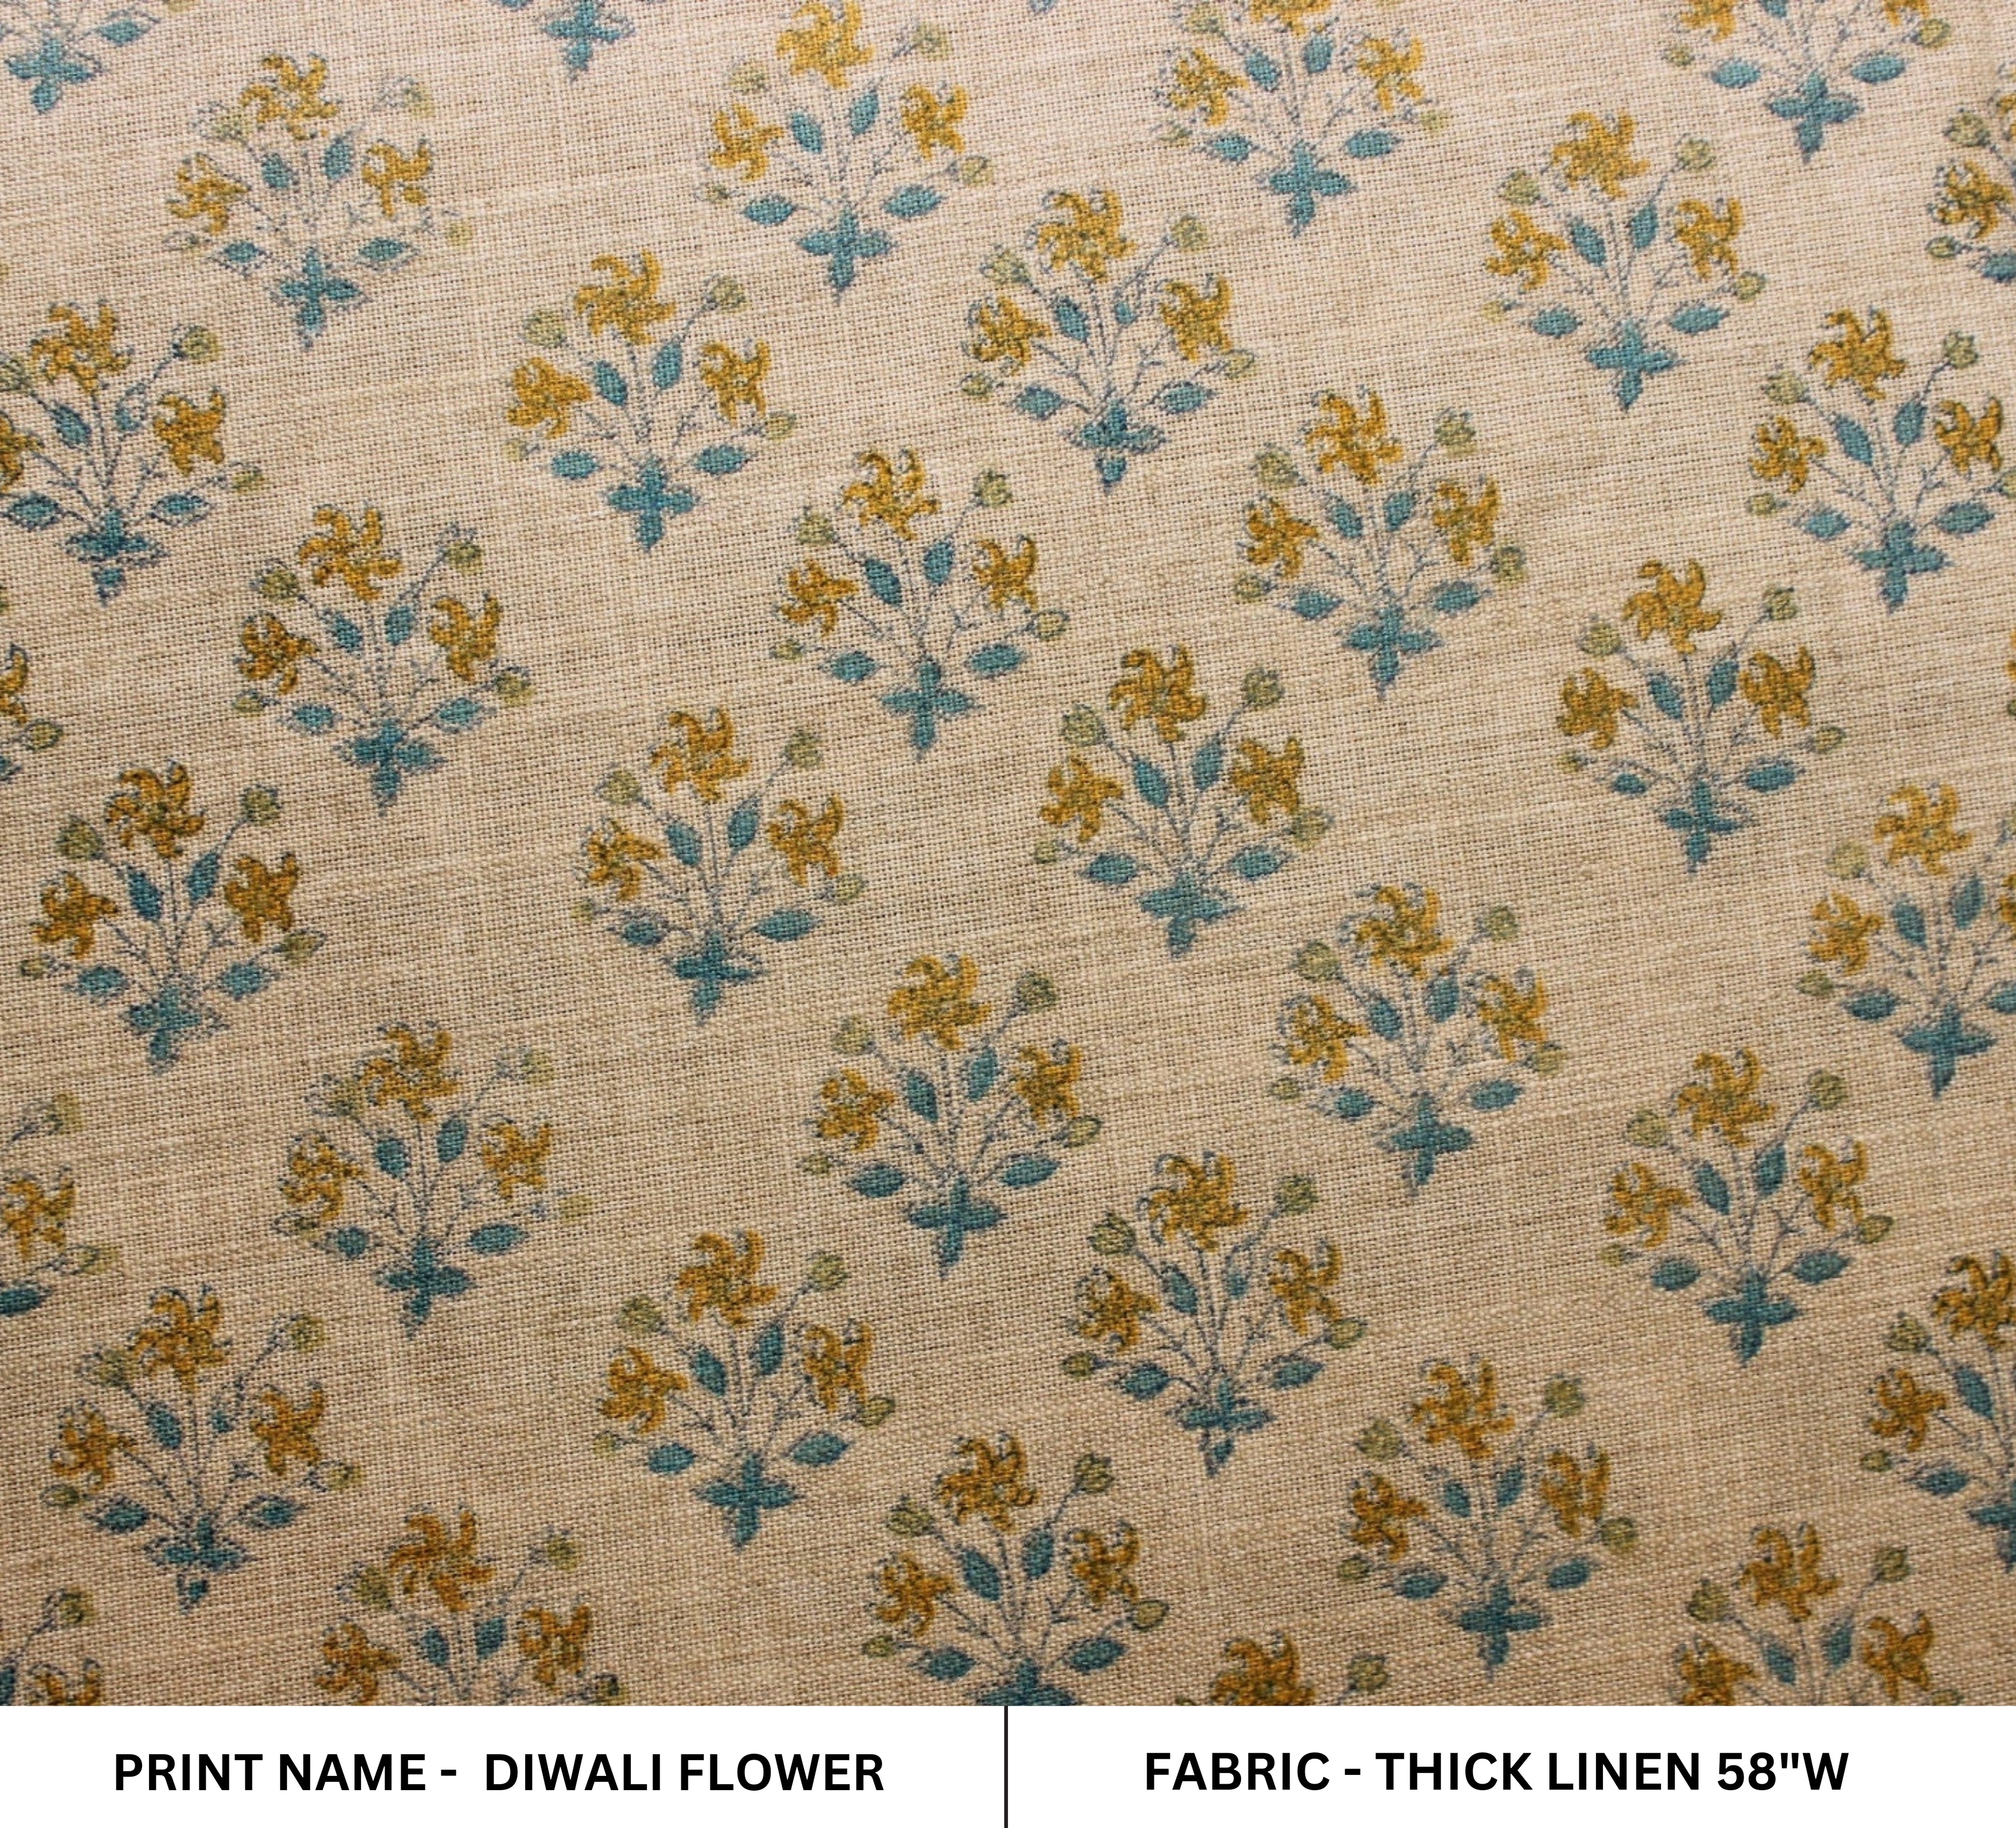 Diwali Flower   Decor Linens,Best For Upholstery,Crafting,Diy,Pure Natural Linen Fabric, Floral Hand Block Print Thick Linen  58"Inch